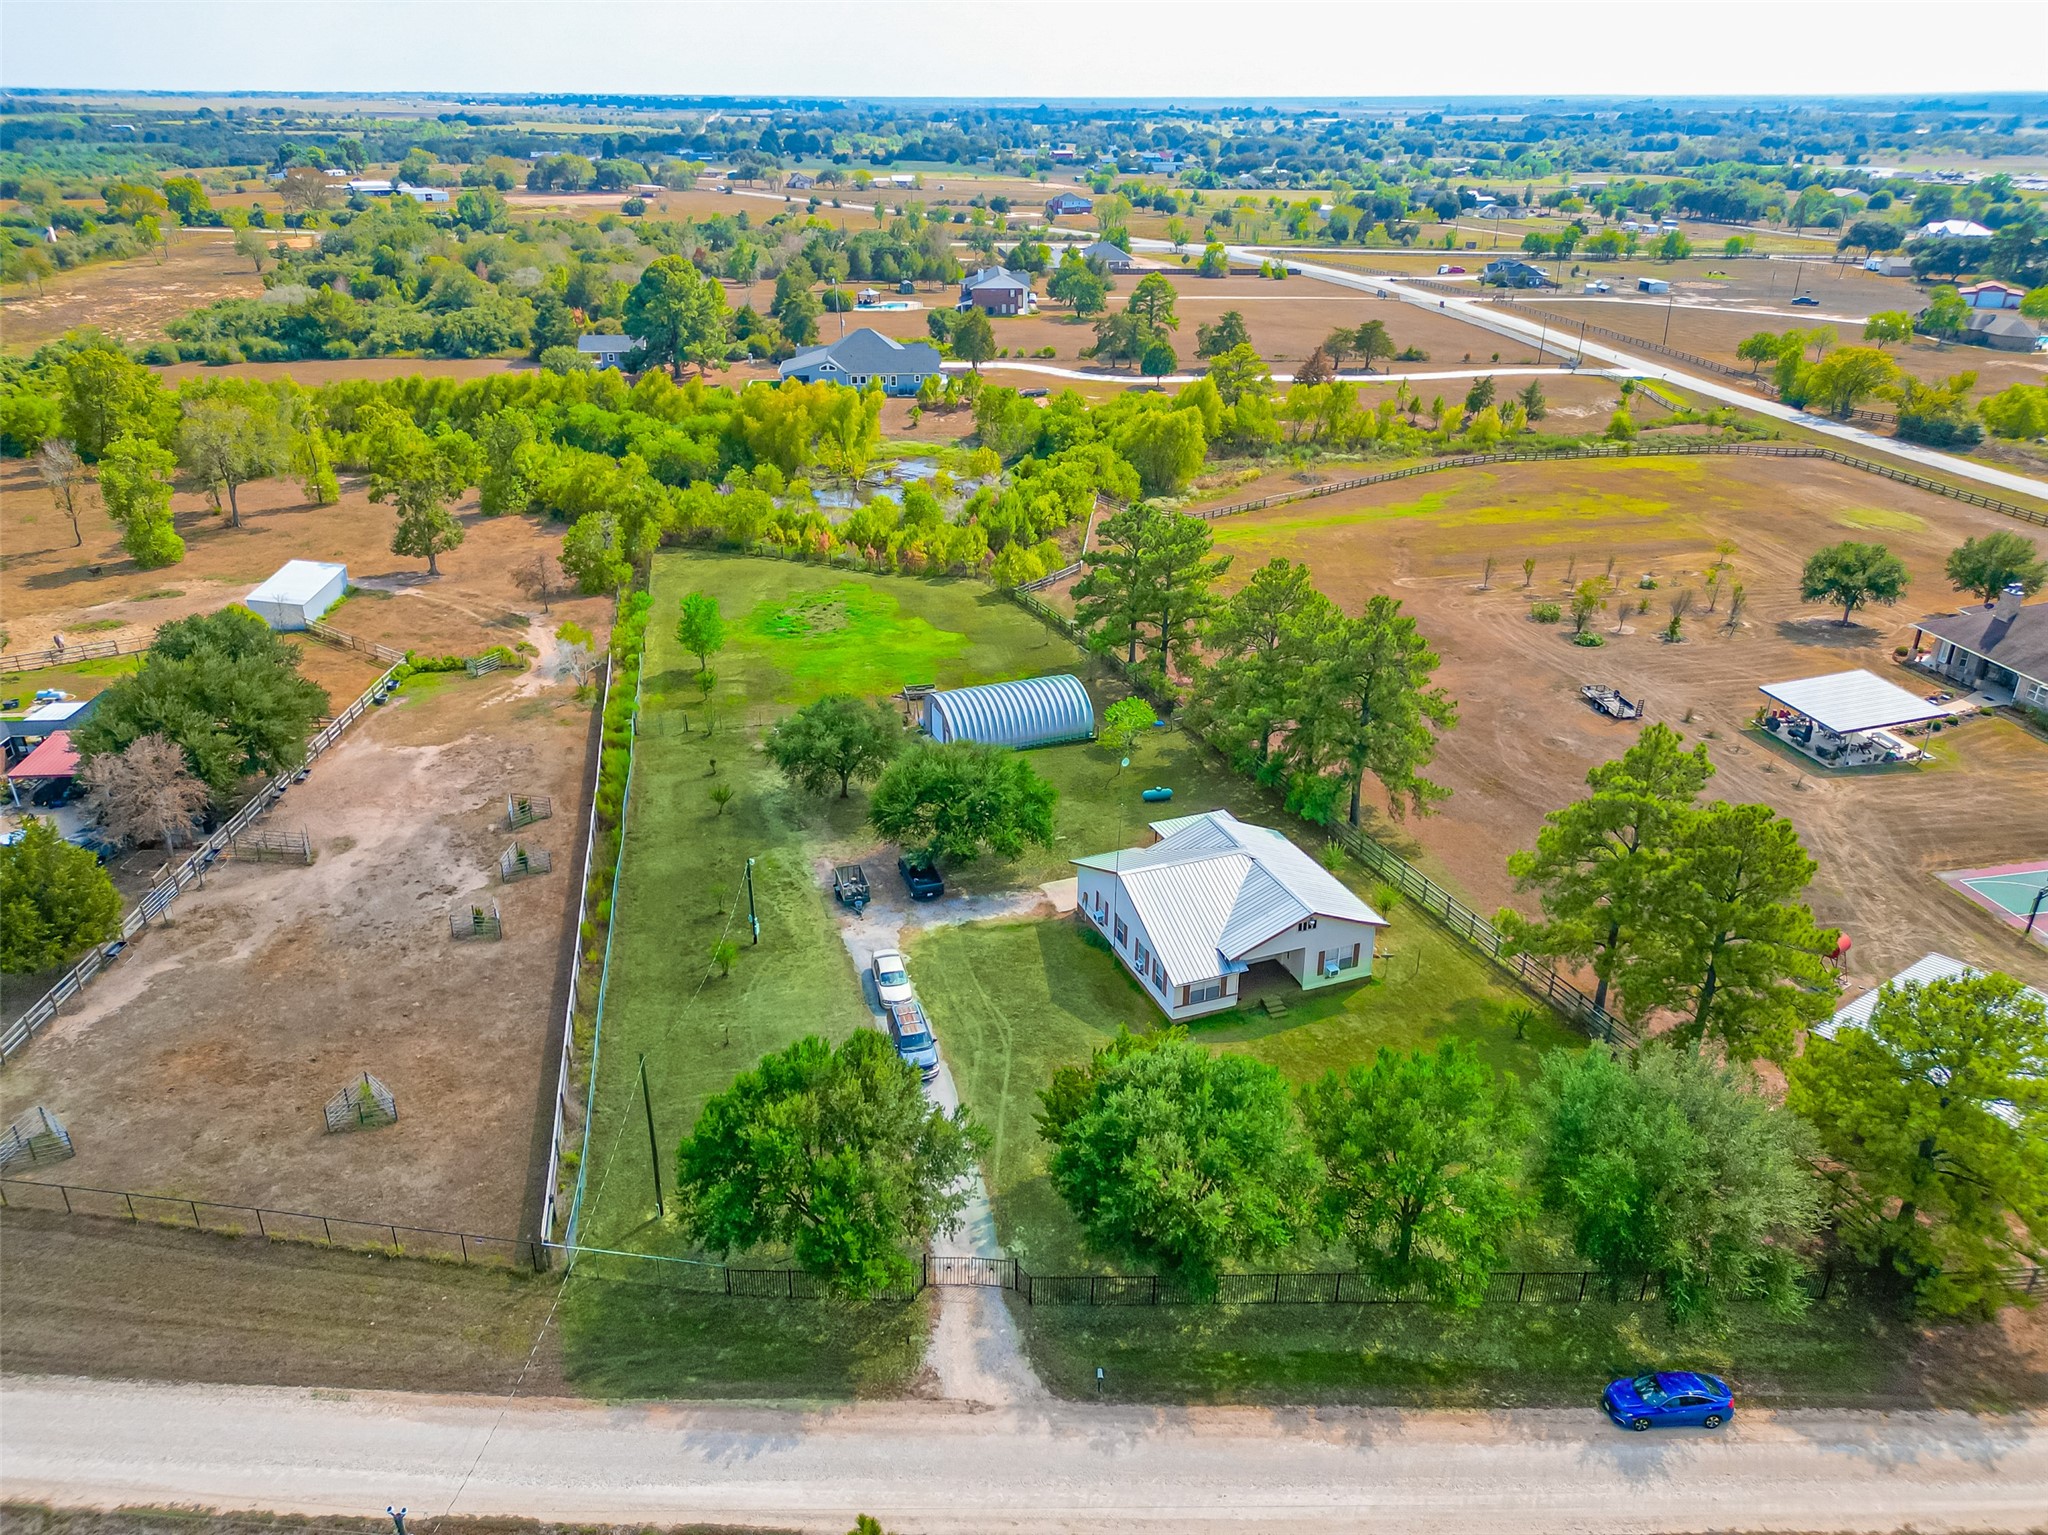 Two Acres... Home SWEET, Country Home. Gorgeous area of well built attractive country homes on 2+ acres. THIS home can be a wonderful investment as most homes in the area are larger ...remember that sage real estate advise... BUY the least expensive home in THE BEST NEIGHBORHOOD!